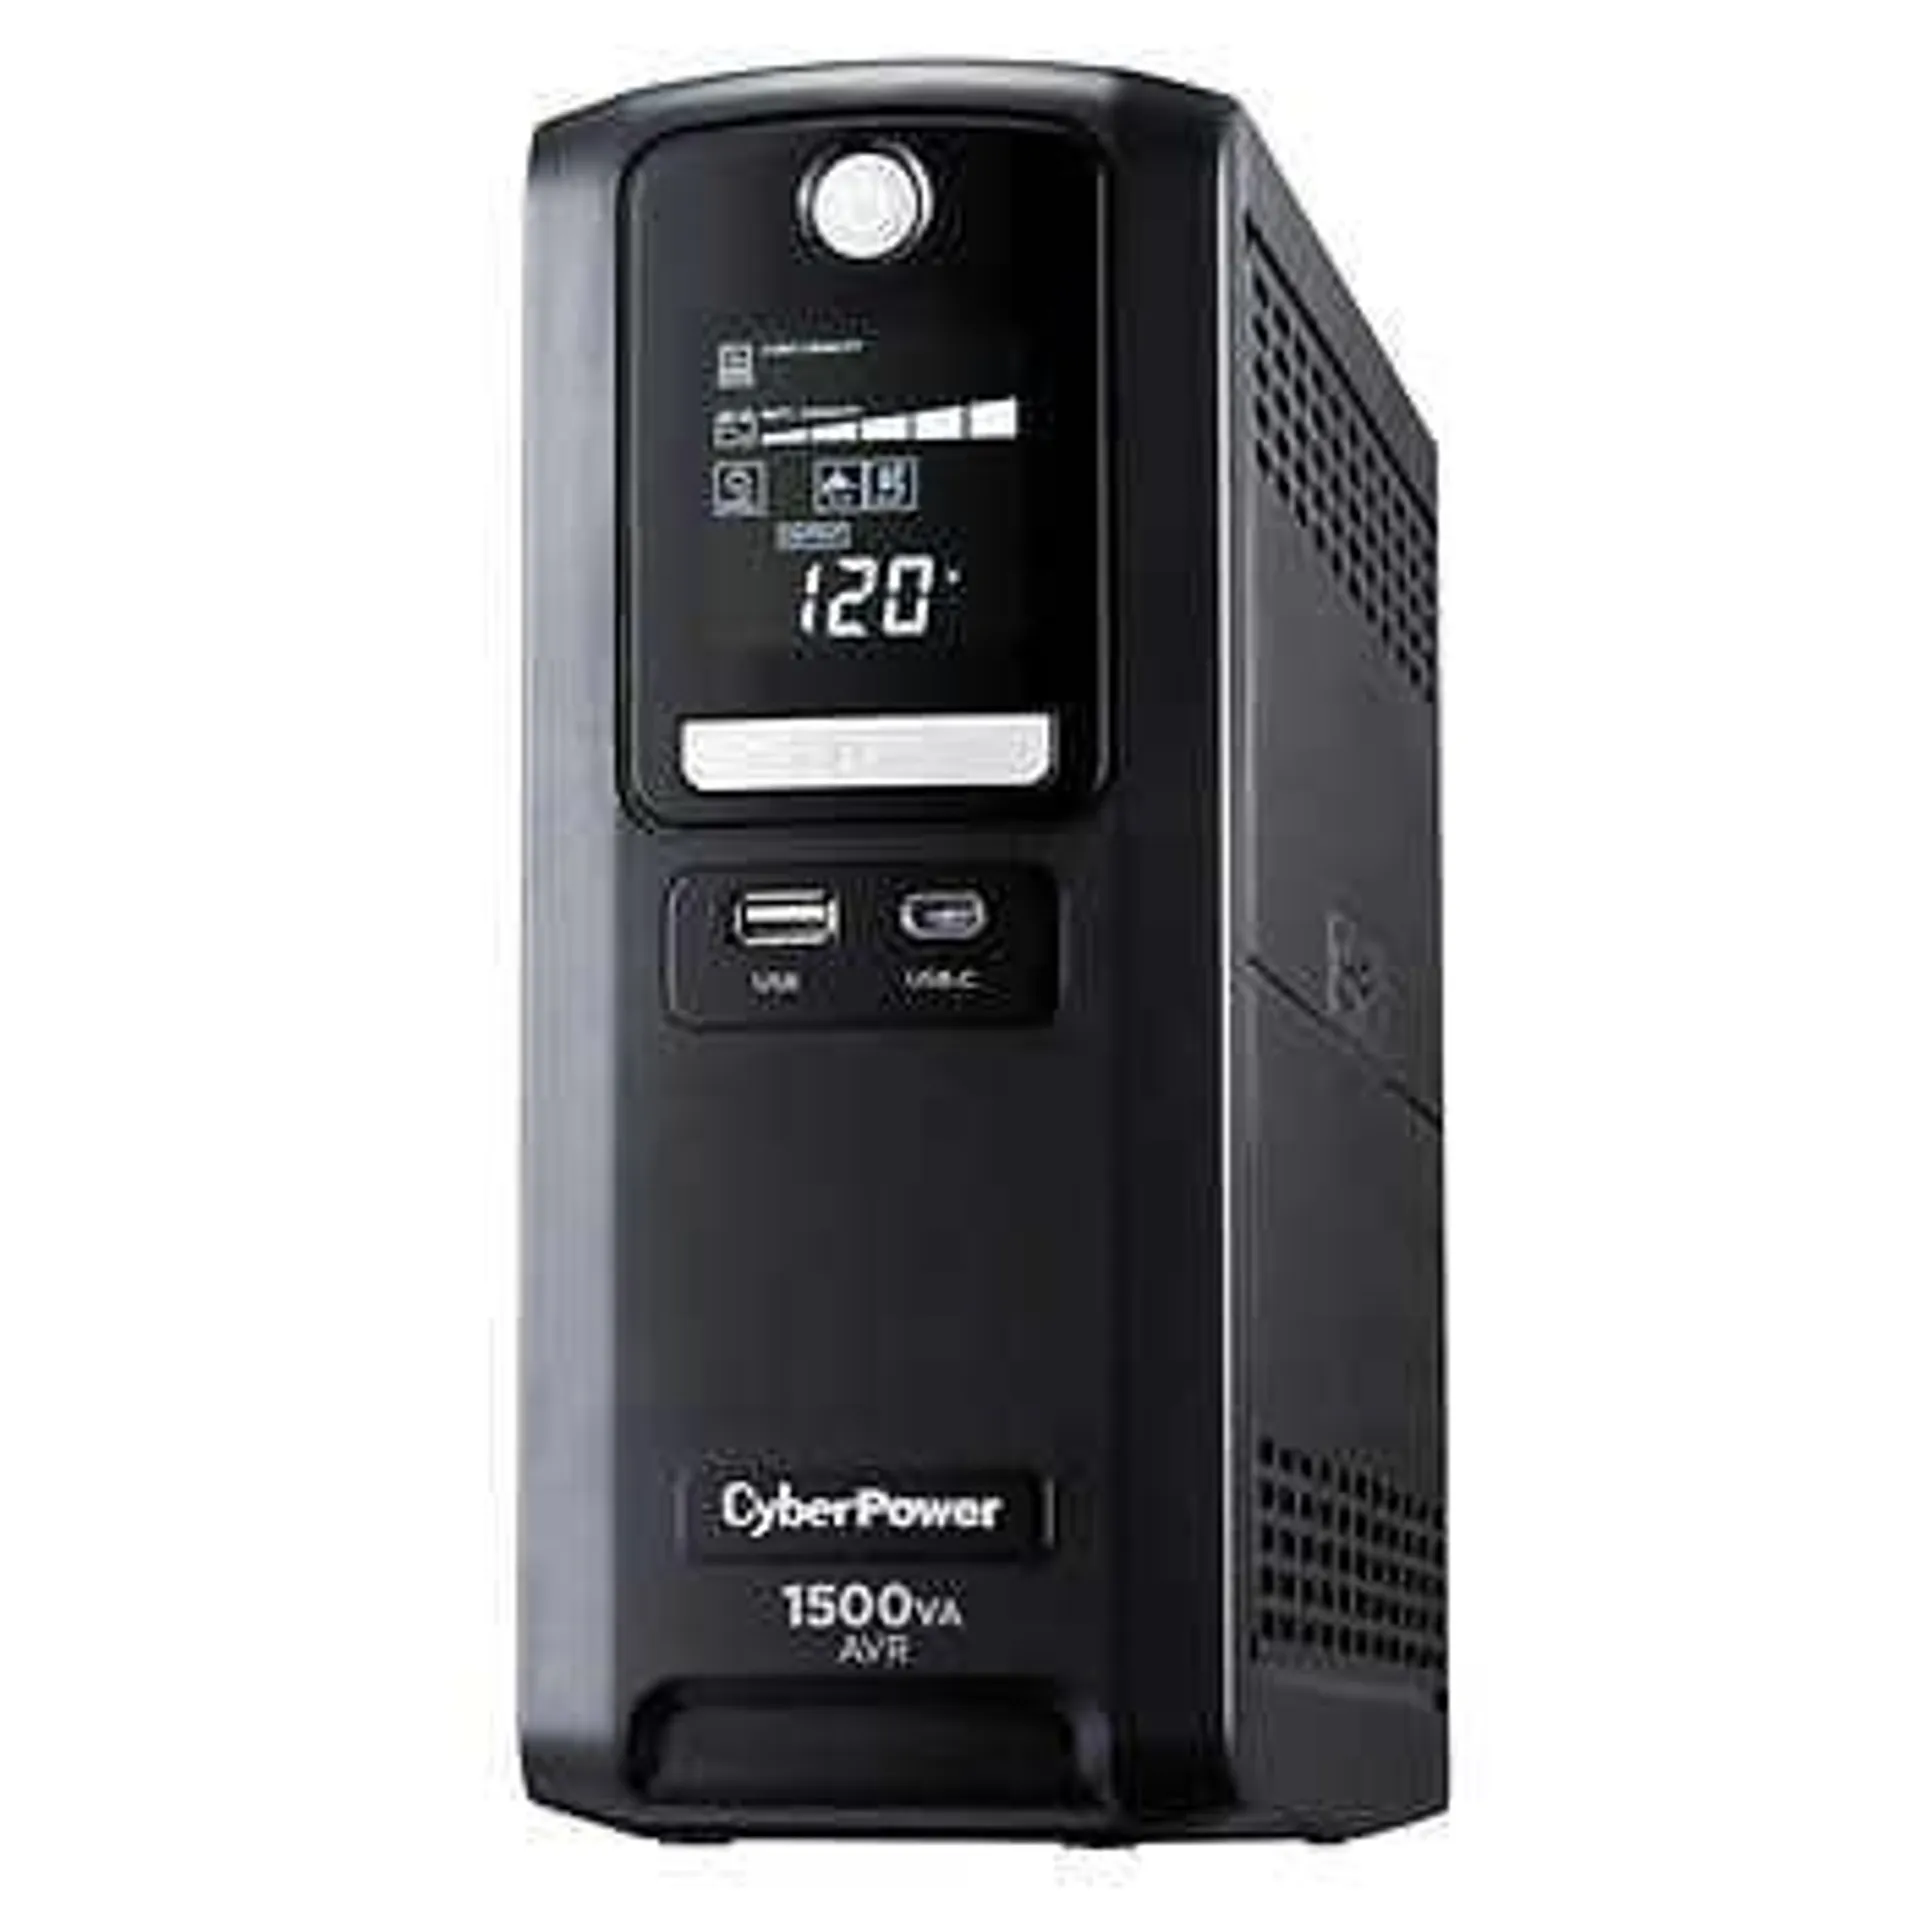 CyberPower 1500VA/900Watts Simulated Sine Wave UPS Battery Backup with Surge Protection